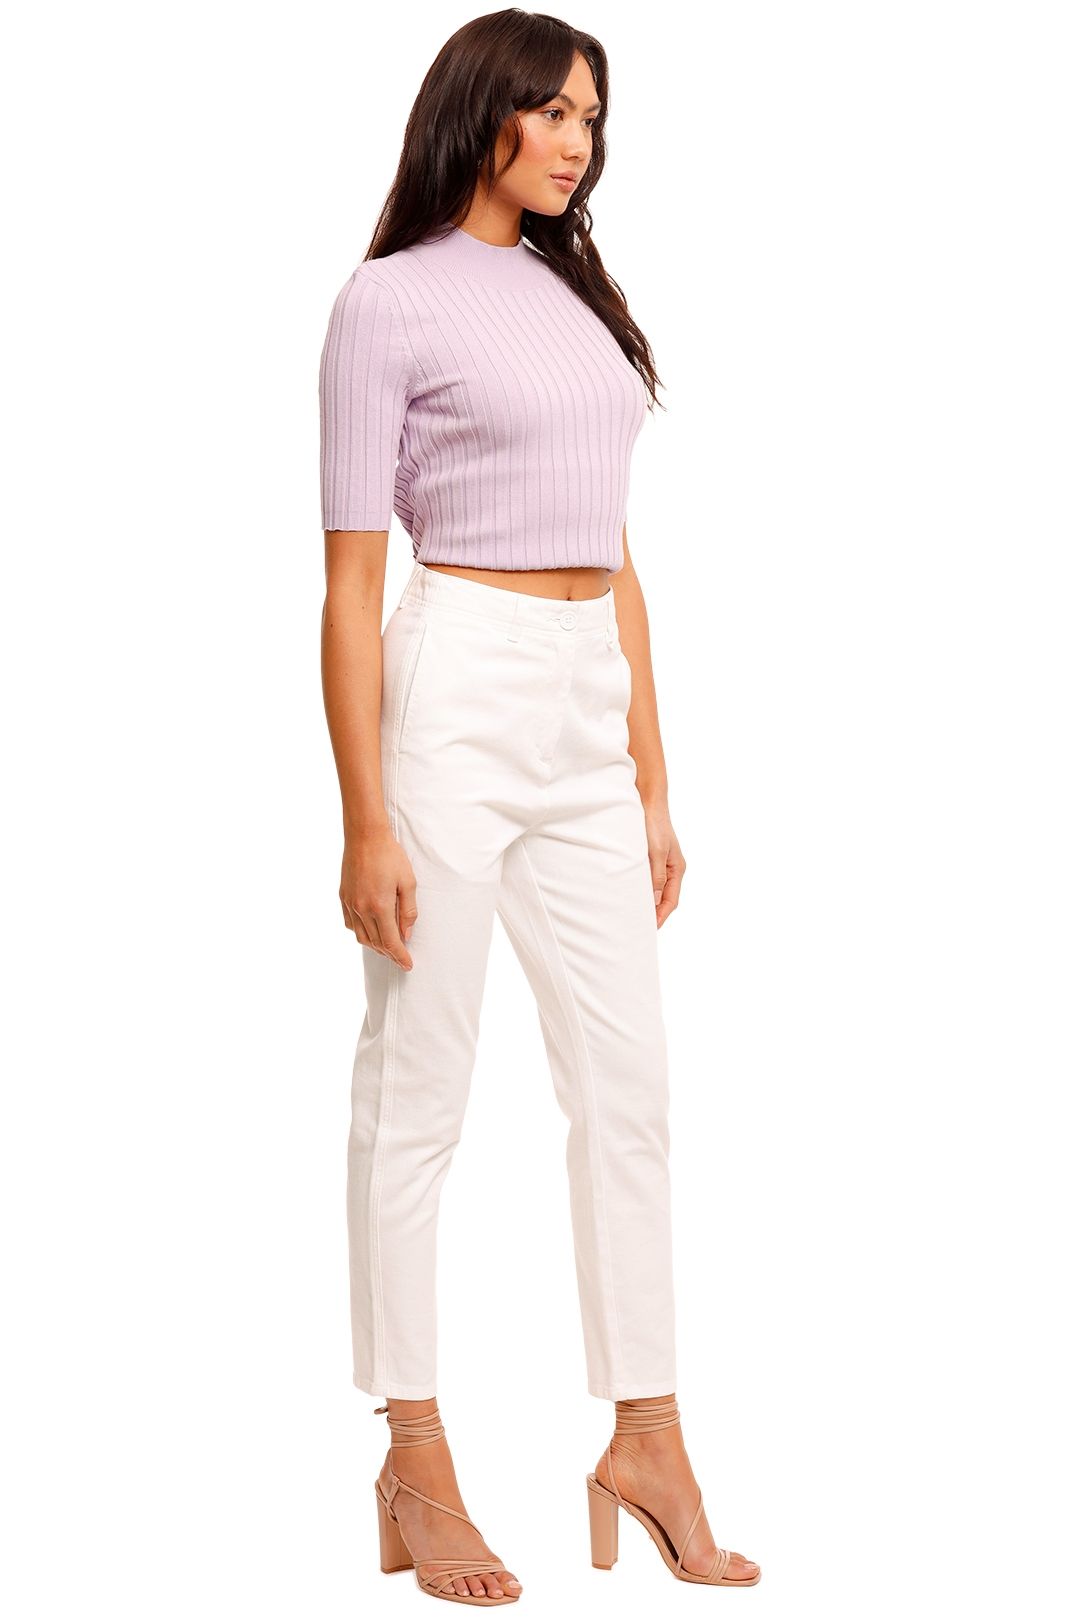 Significant Other Ariana Short Sleeve Lilac Knit Top high neck